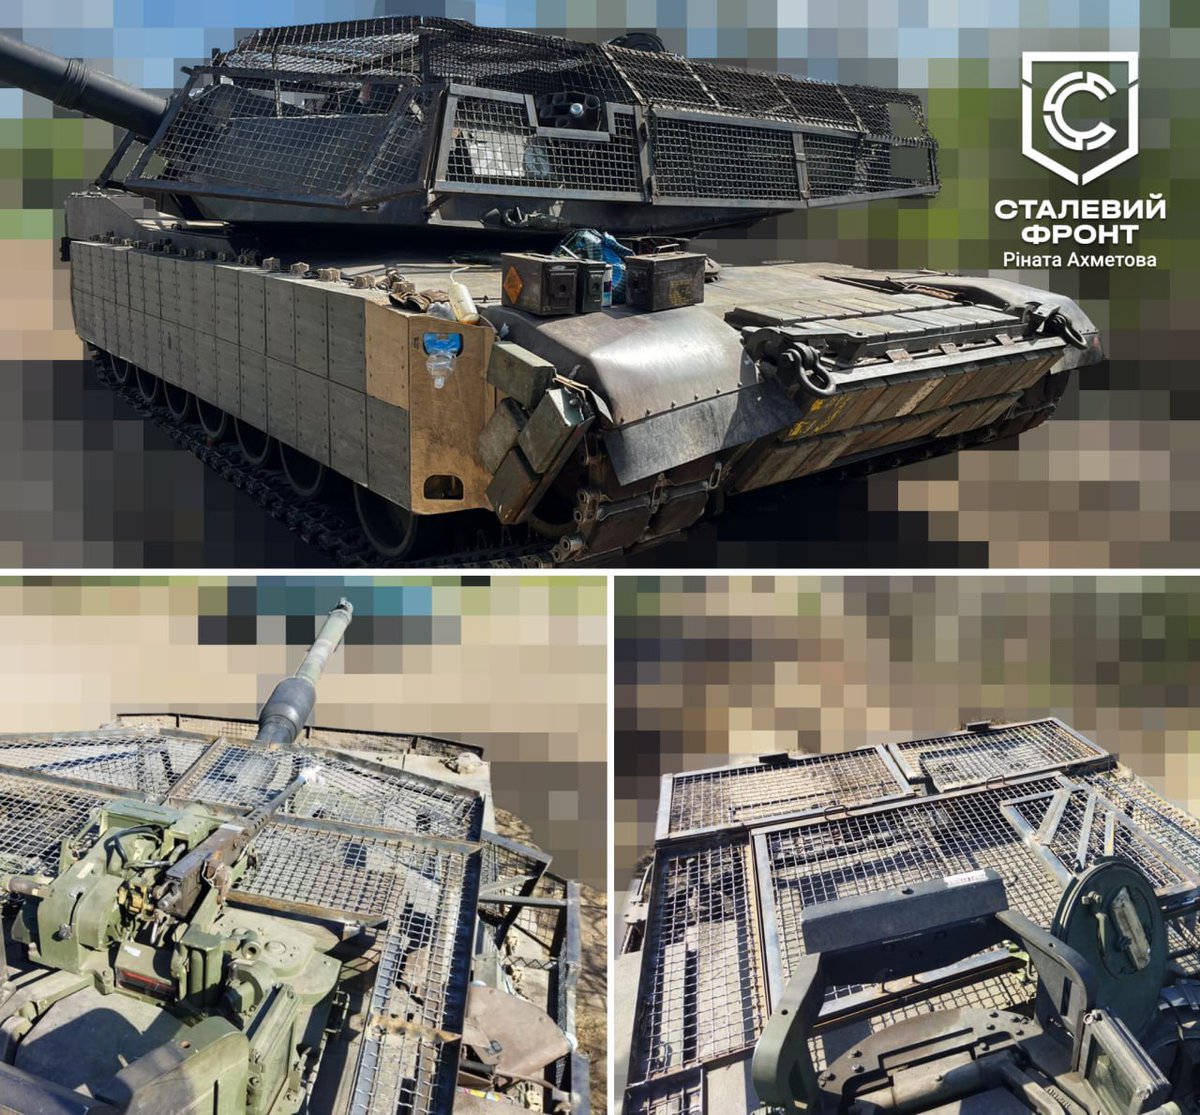 Ukraine's domestic steel producer Metinvest is adding combat proven anti-drone protection they call Steel Front to T-72, T-64, and Abrams tanks. 7 Abrams tanks now have this modification on the front. The system was developed jointly with the military.